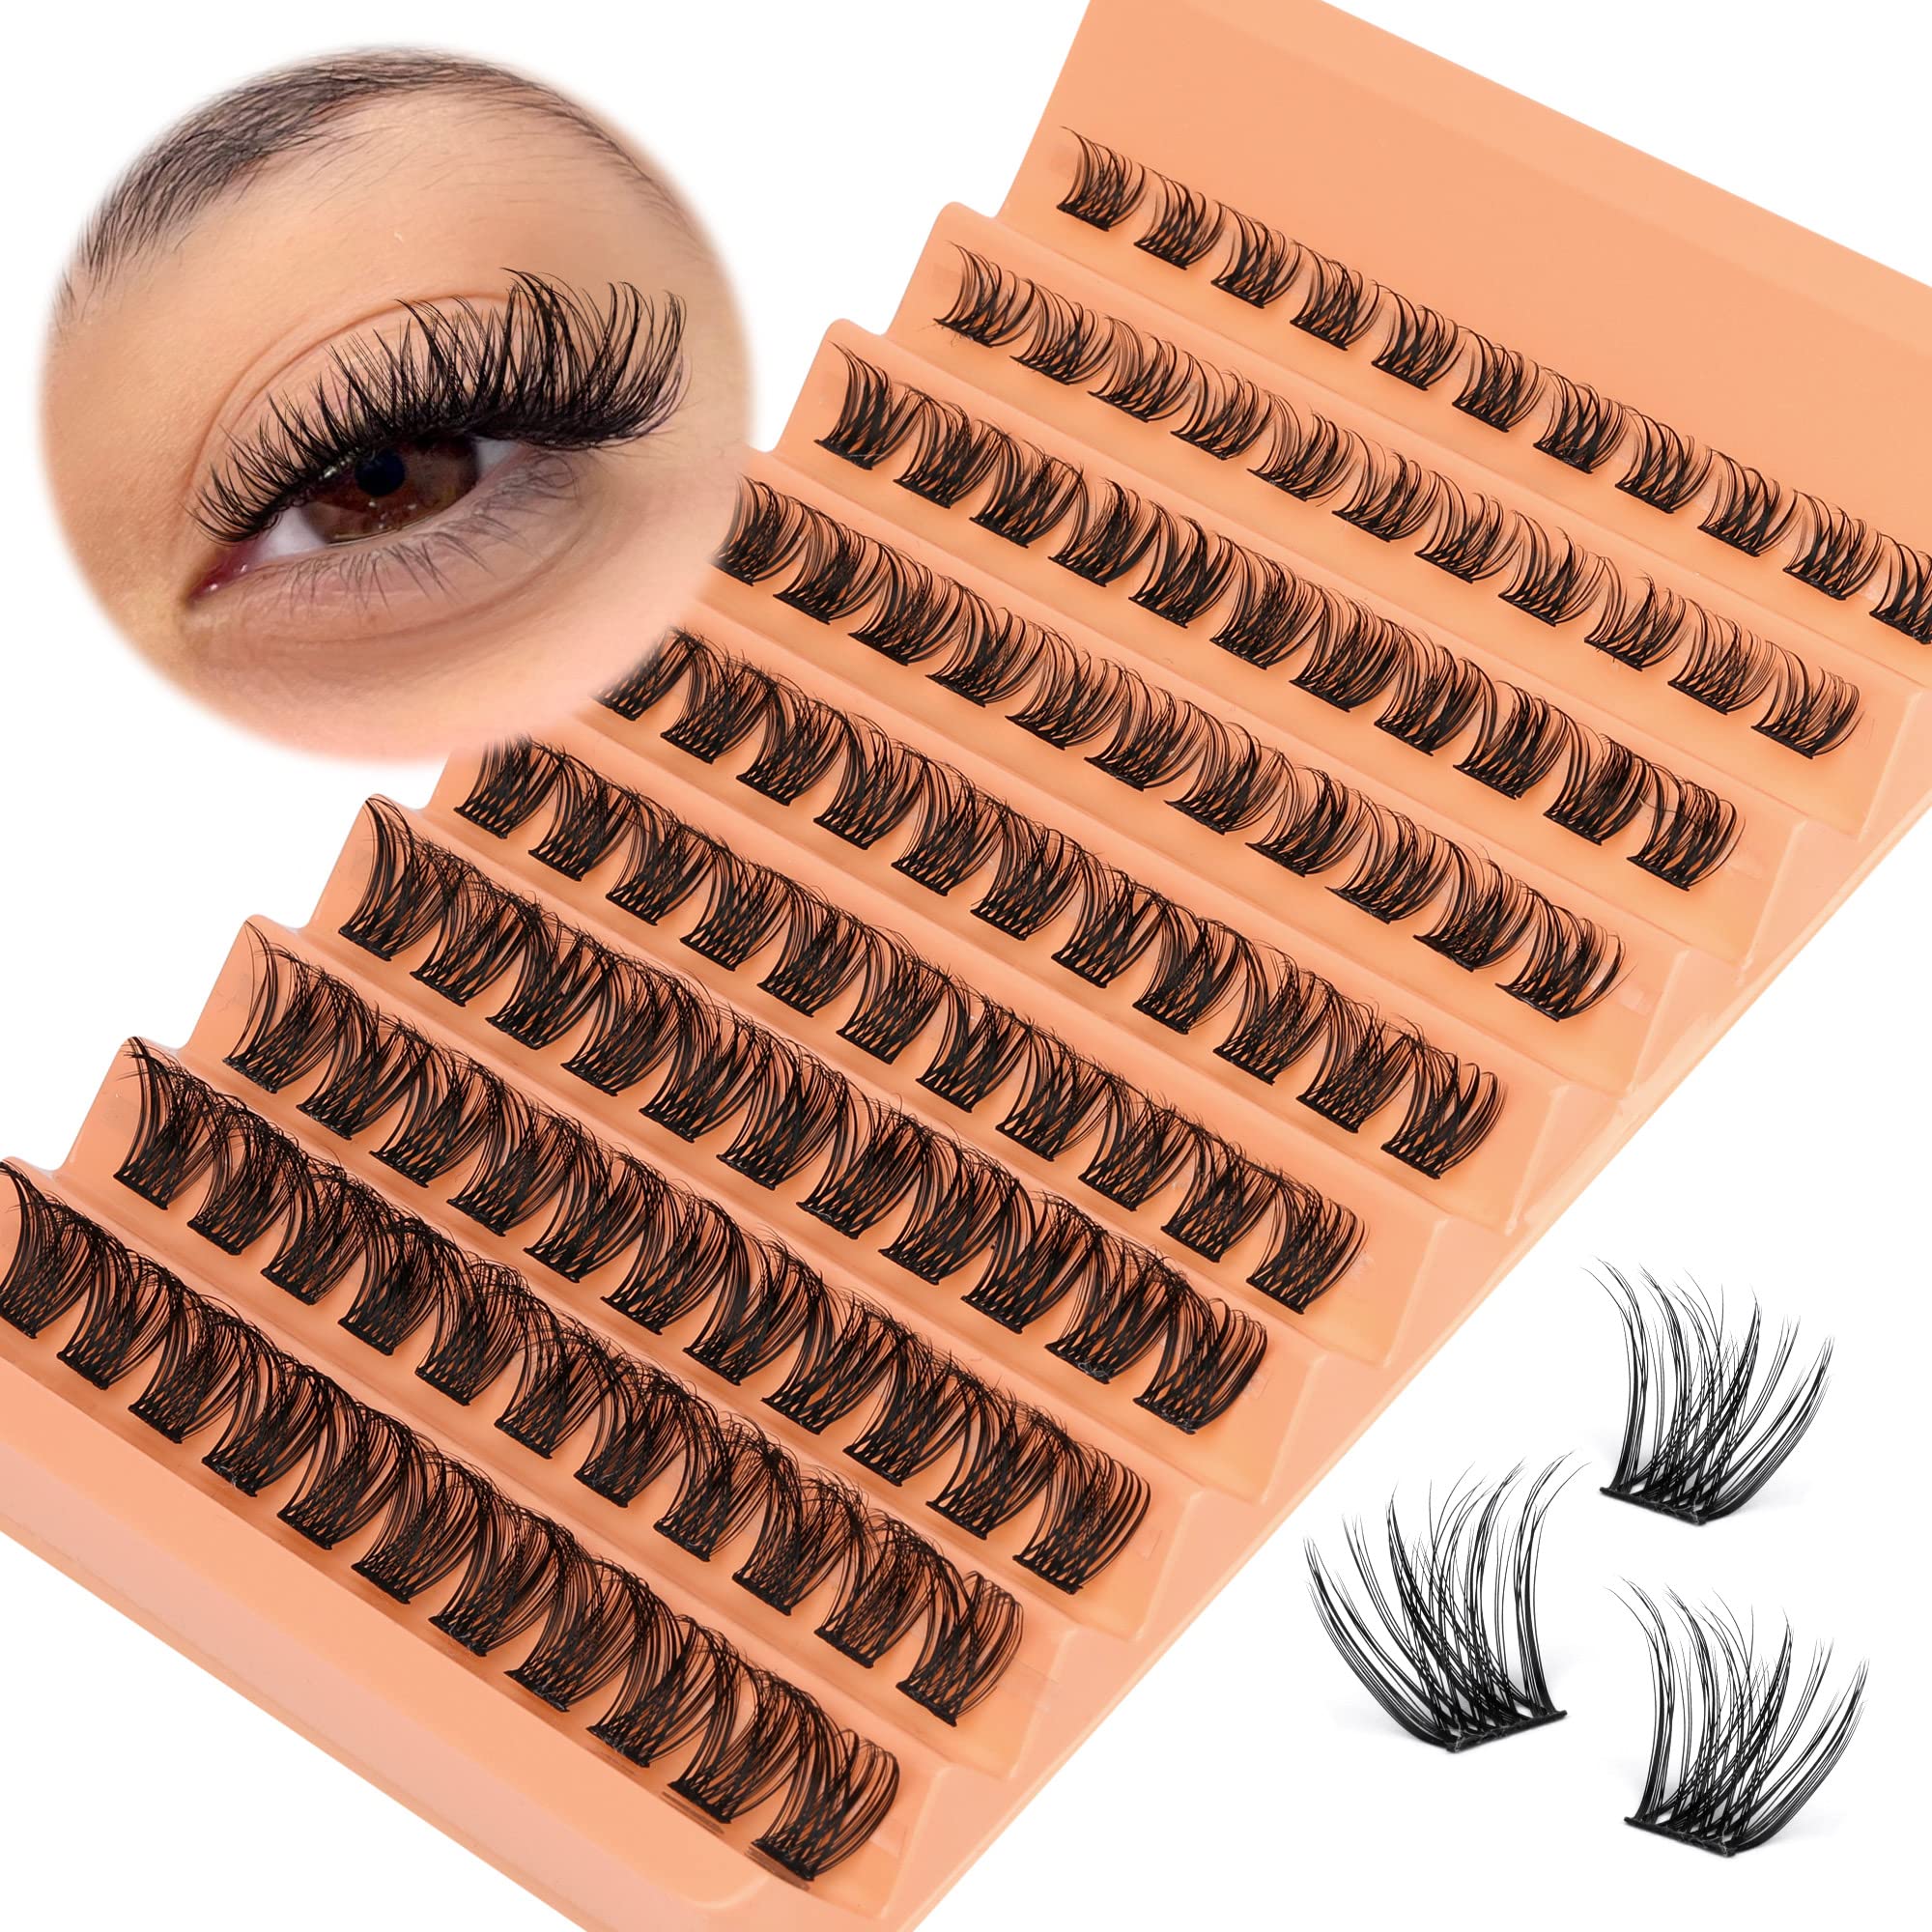 Natural Individual Lashes Clusters D Curl Wispy Eyelashes Mink Fluffy Lashes  8-16mm DIY Eyelash Extensions 110 Pcs Volume Lash Clusters by Eefofnn 1.Natural  clusters